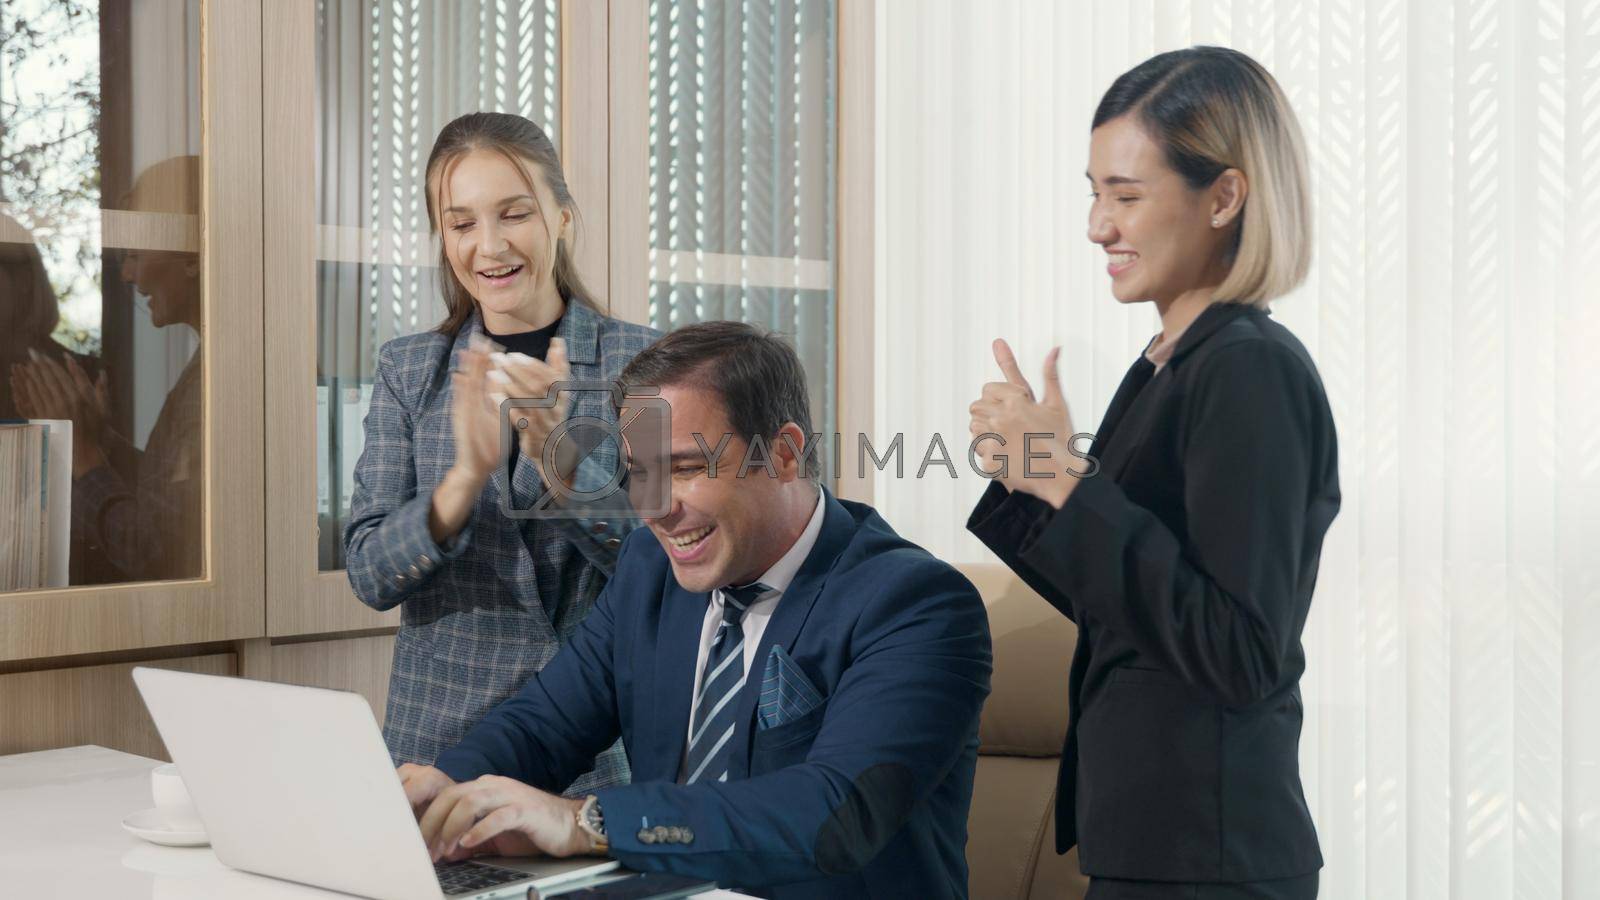 Royalty free image of Celebrating winners success project. Three happy business people team excited receiving good news together by Sorapop